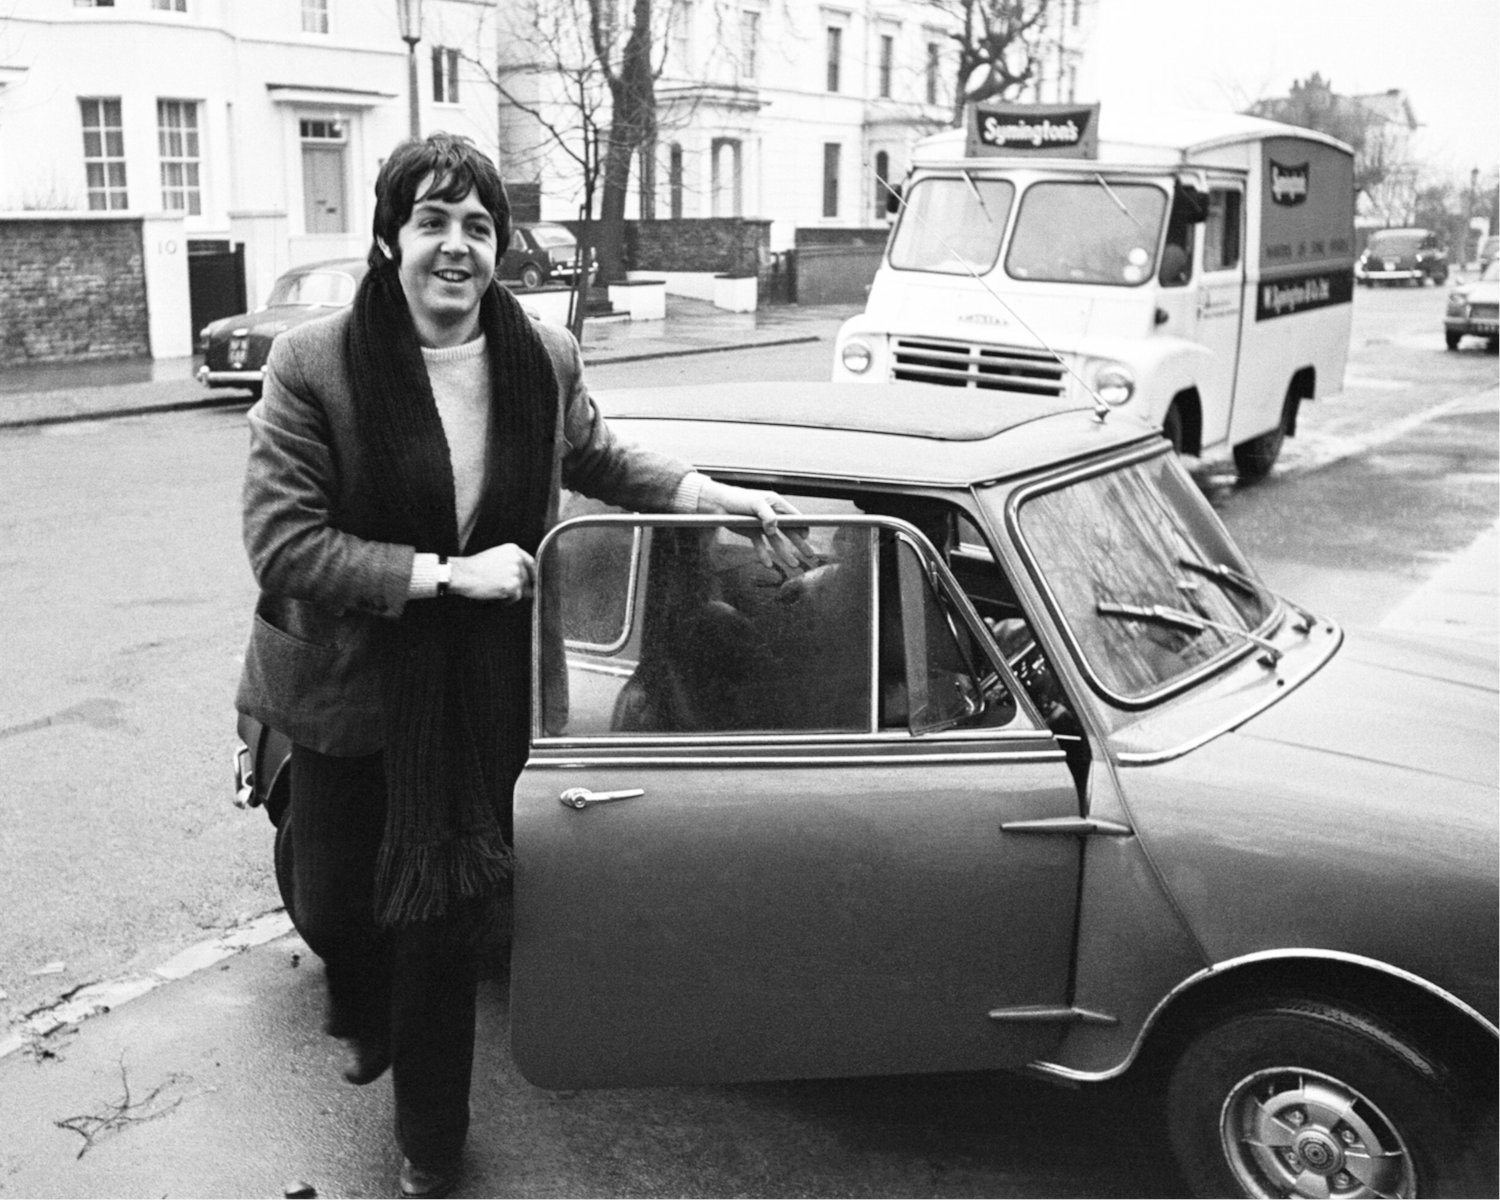 Paul McCartney of The Beatles with his Radford Mini - Photo by Radford, sourced from Hagerty.com